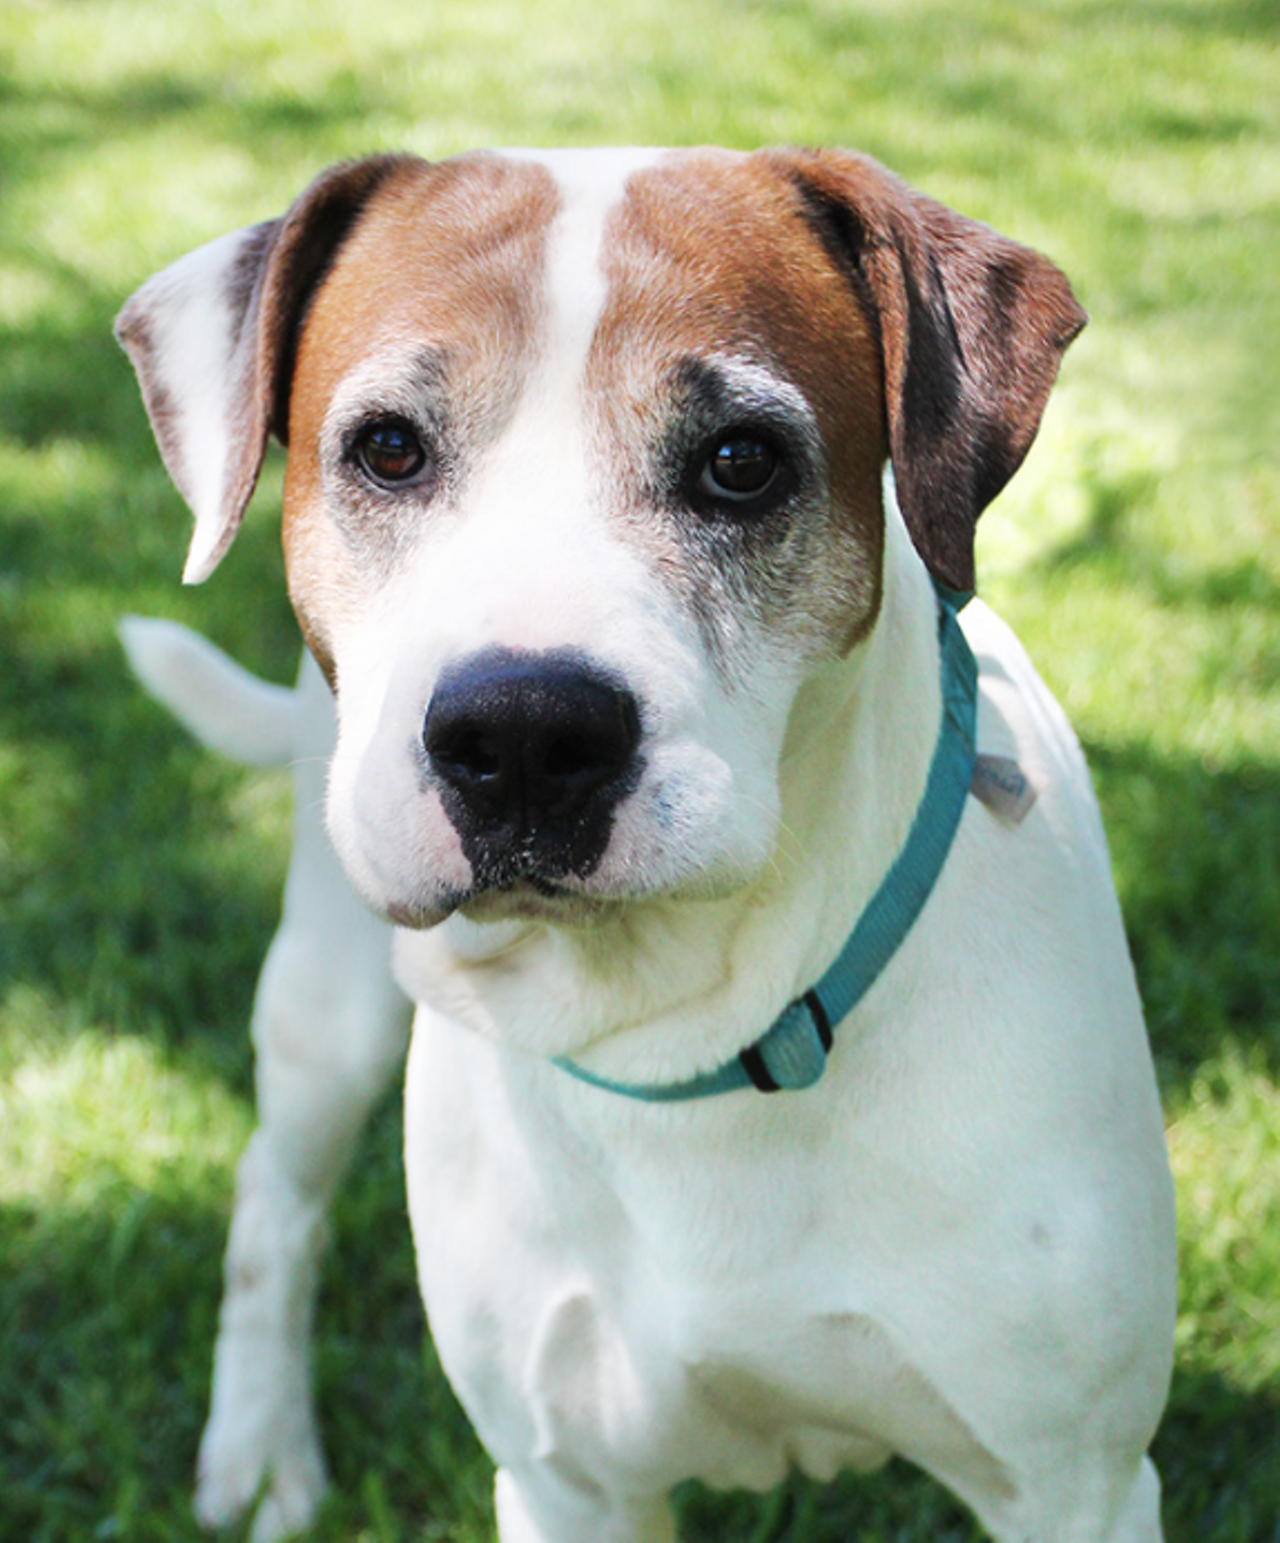 Phillip
"Hi, I’m Phillip! I’m a friendly, calm, and gentle dog. I have great leash walking skills and enjoy taking strolls alongside people. Will you be one of those people I can go on a stroll with? Maybe we can become best buds!"